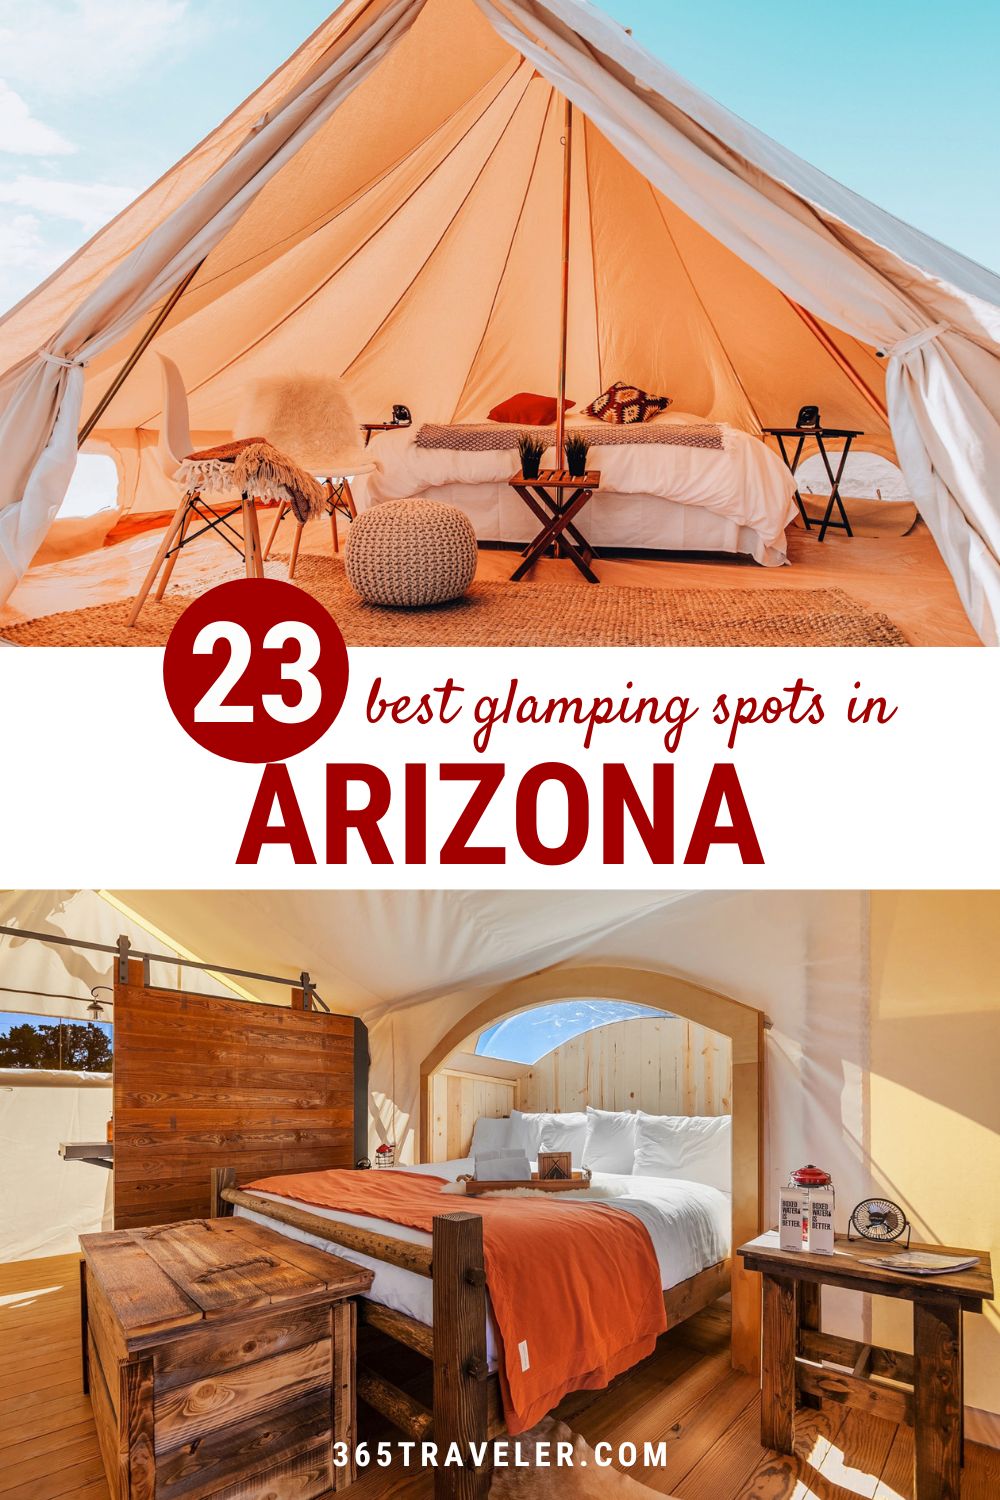 Glamping Arizona: 23 Best Spots You’ve Got To See